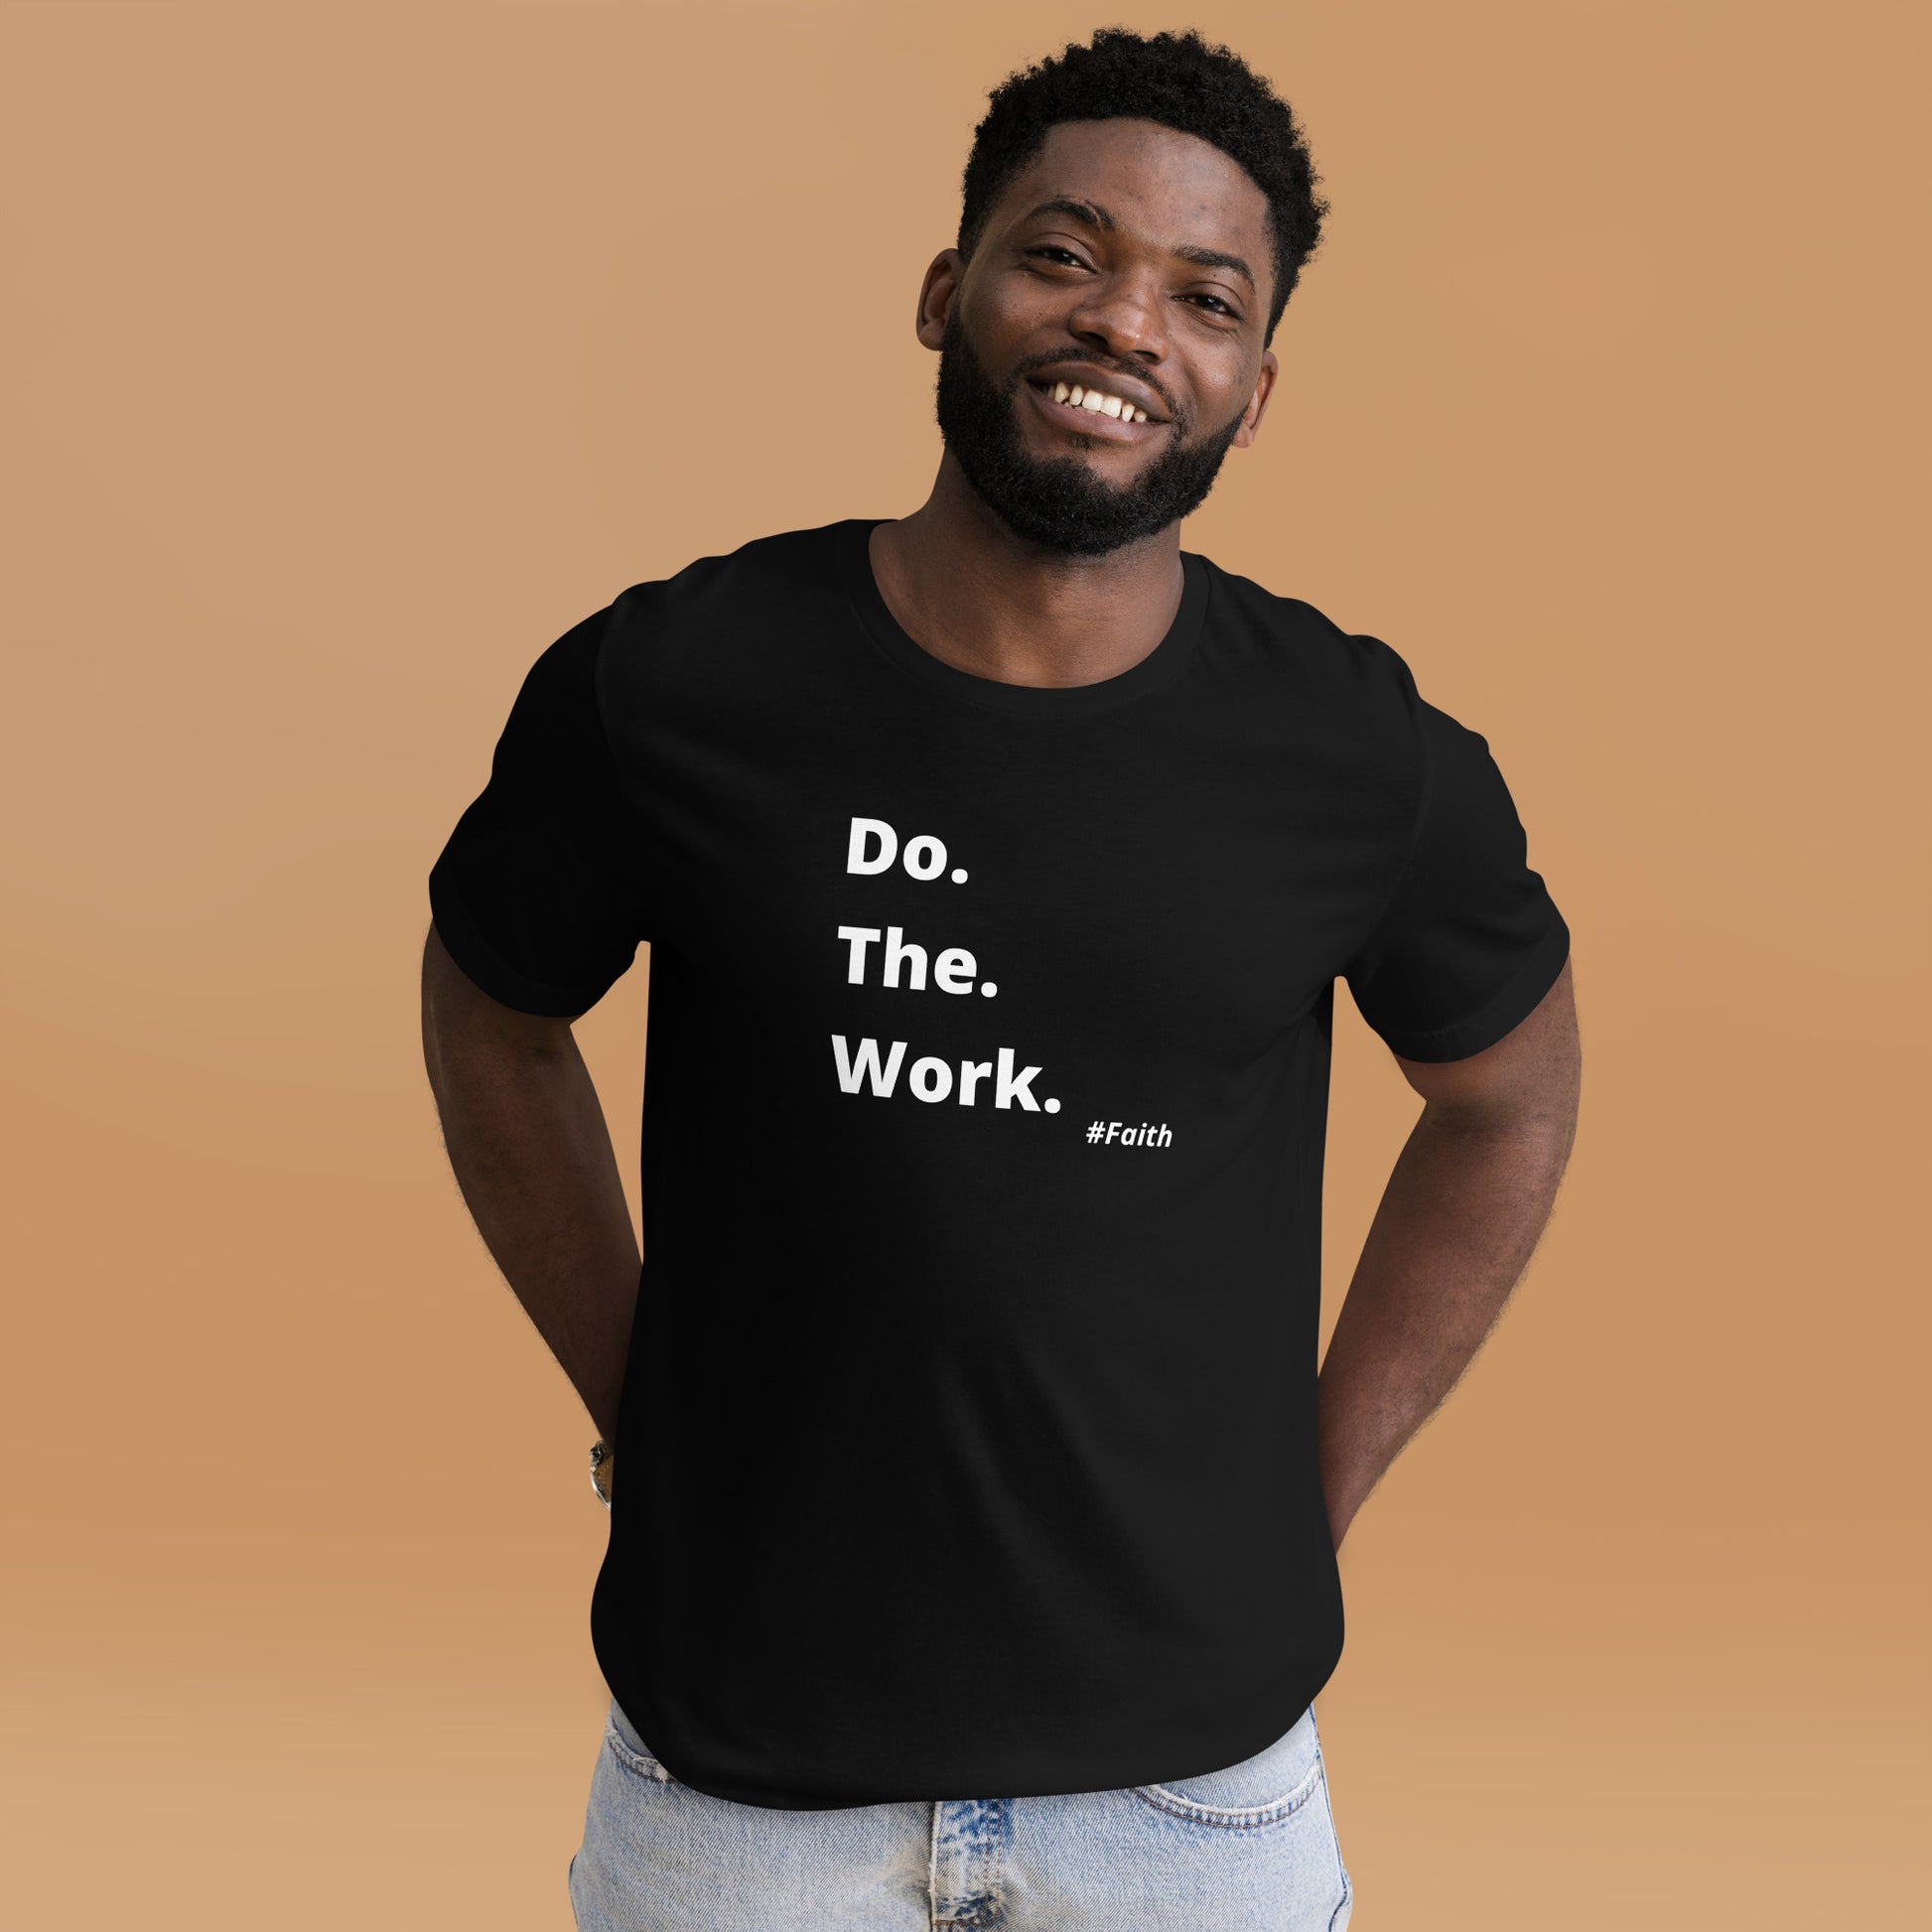 T-Shirt Short-Sleeve F.A.I.T.H. Connection – - Do. Unisex Work. The. Black